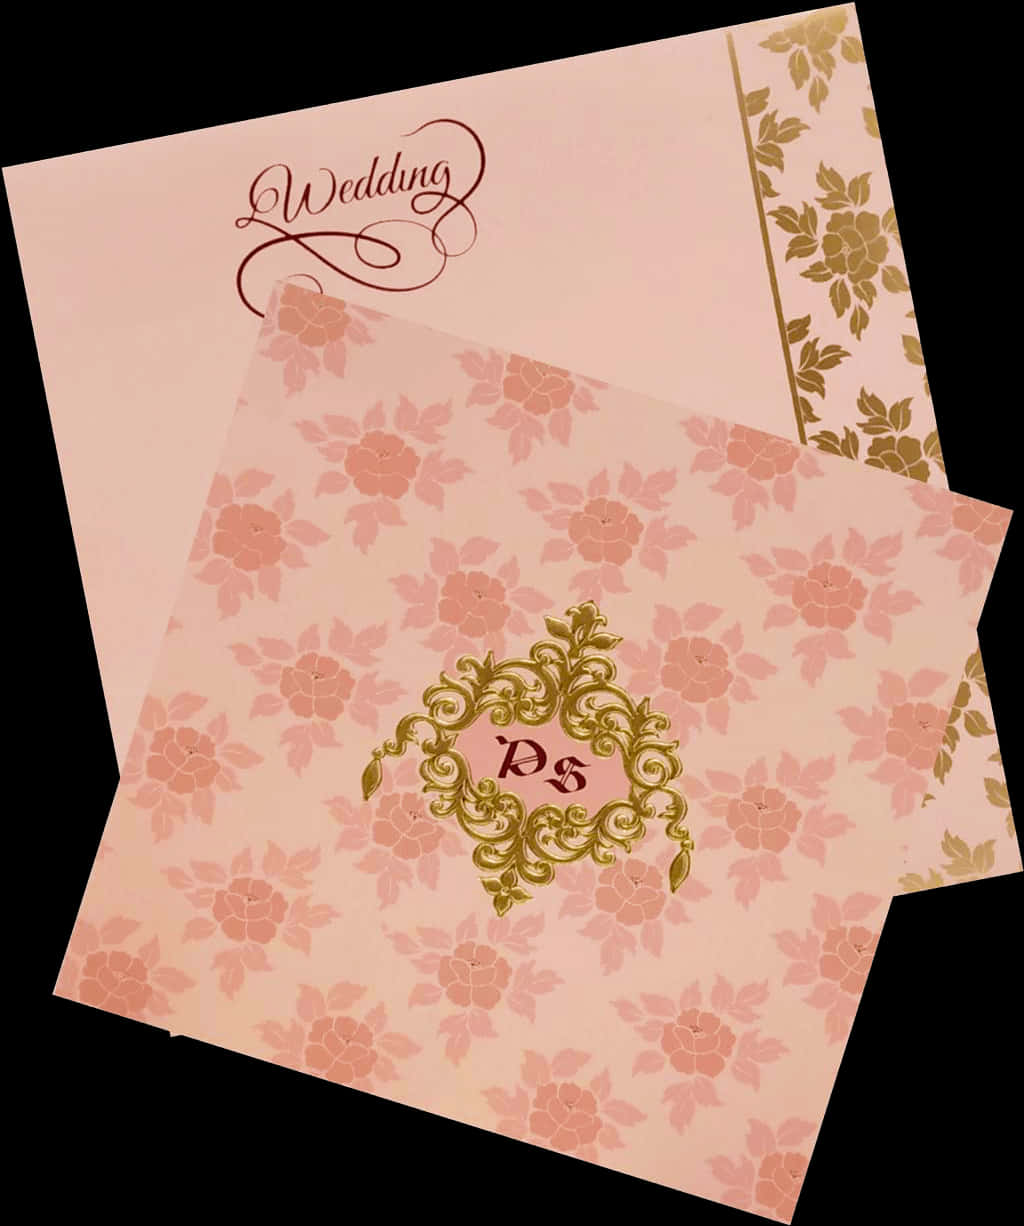 The Wedding Card - Greeting Card, Hd Png Download